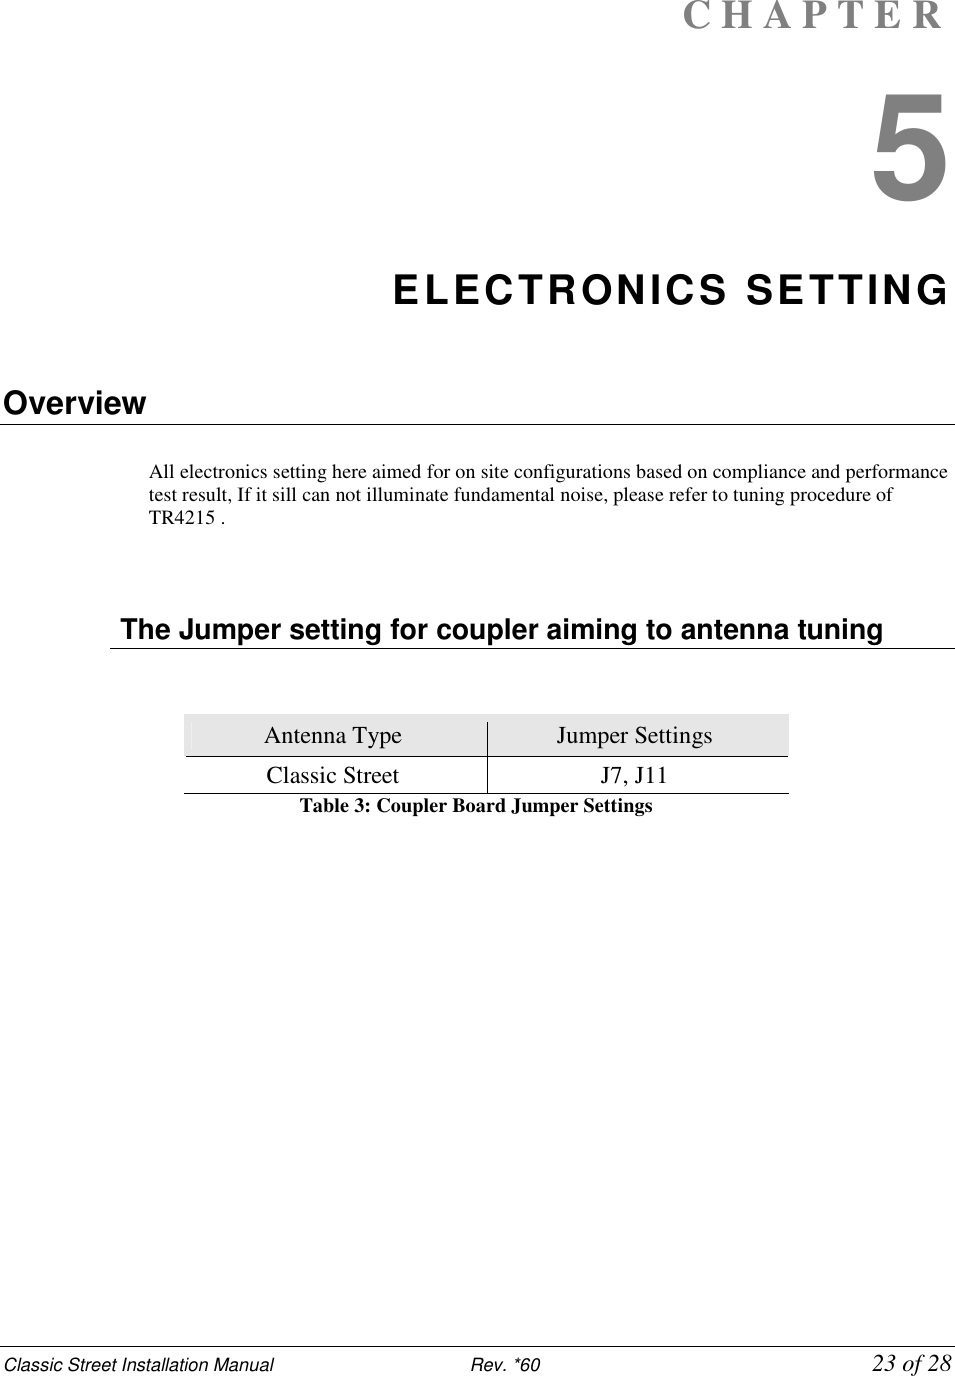 Classic Street Installation Manual                           Rev. *60             23 of 28 C H A P T E R  5 ELECTRONICS SETTING  Overview  All electronics setting here aimed for on site configurations based on compliance and performance test result, If it sill can not illuminate fundamental noise, please refer to tuning procedure of TR4215 .     The Jumper setting for coupler aiming to antenna tuning   Antenna Type  Jumper Settings Classic Street  J7, J11 Table 3: Coupler Board Jumper Settings                